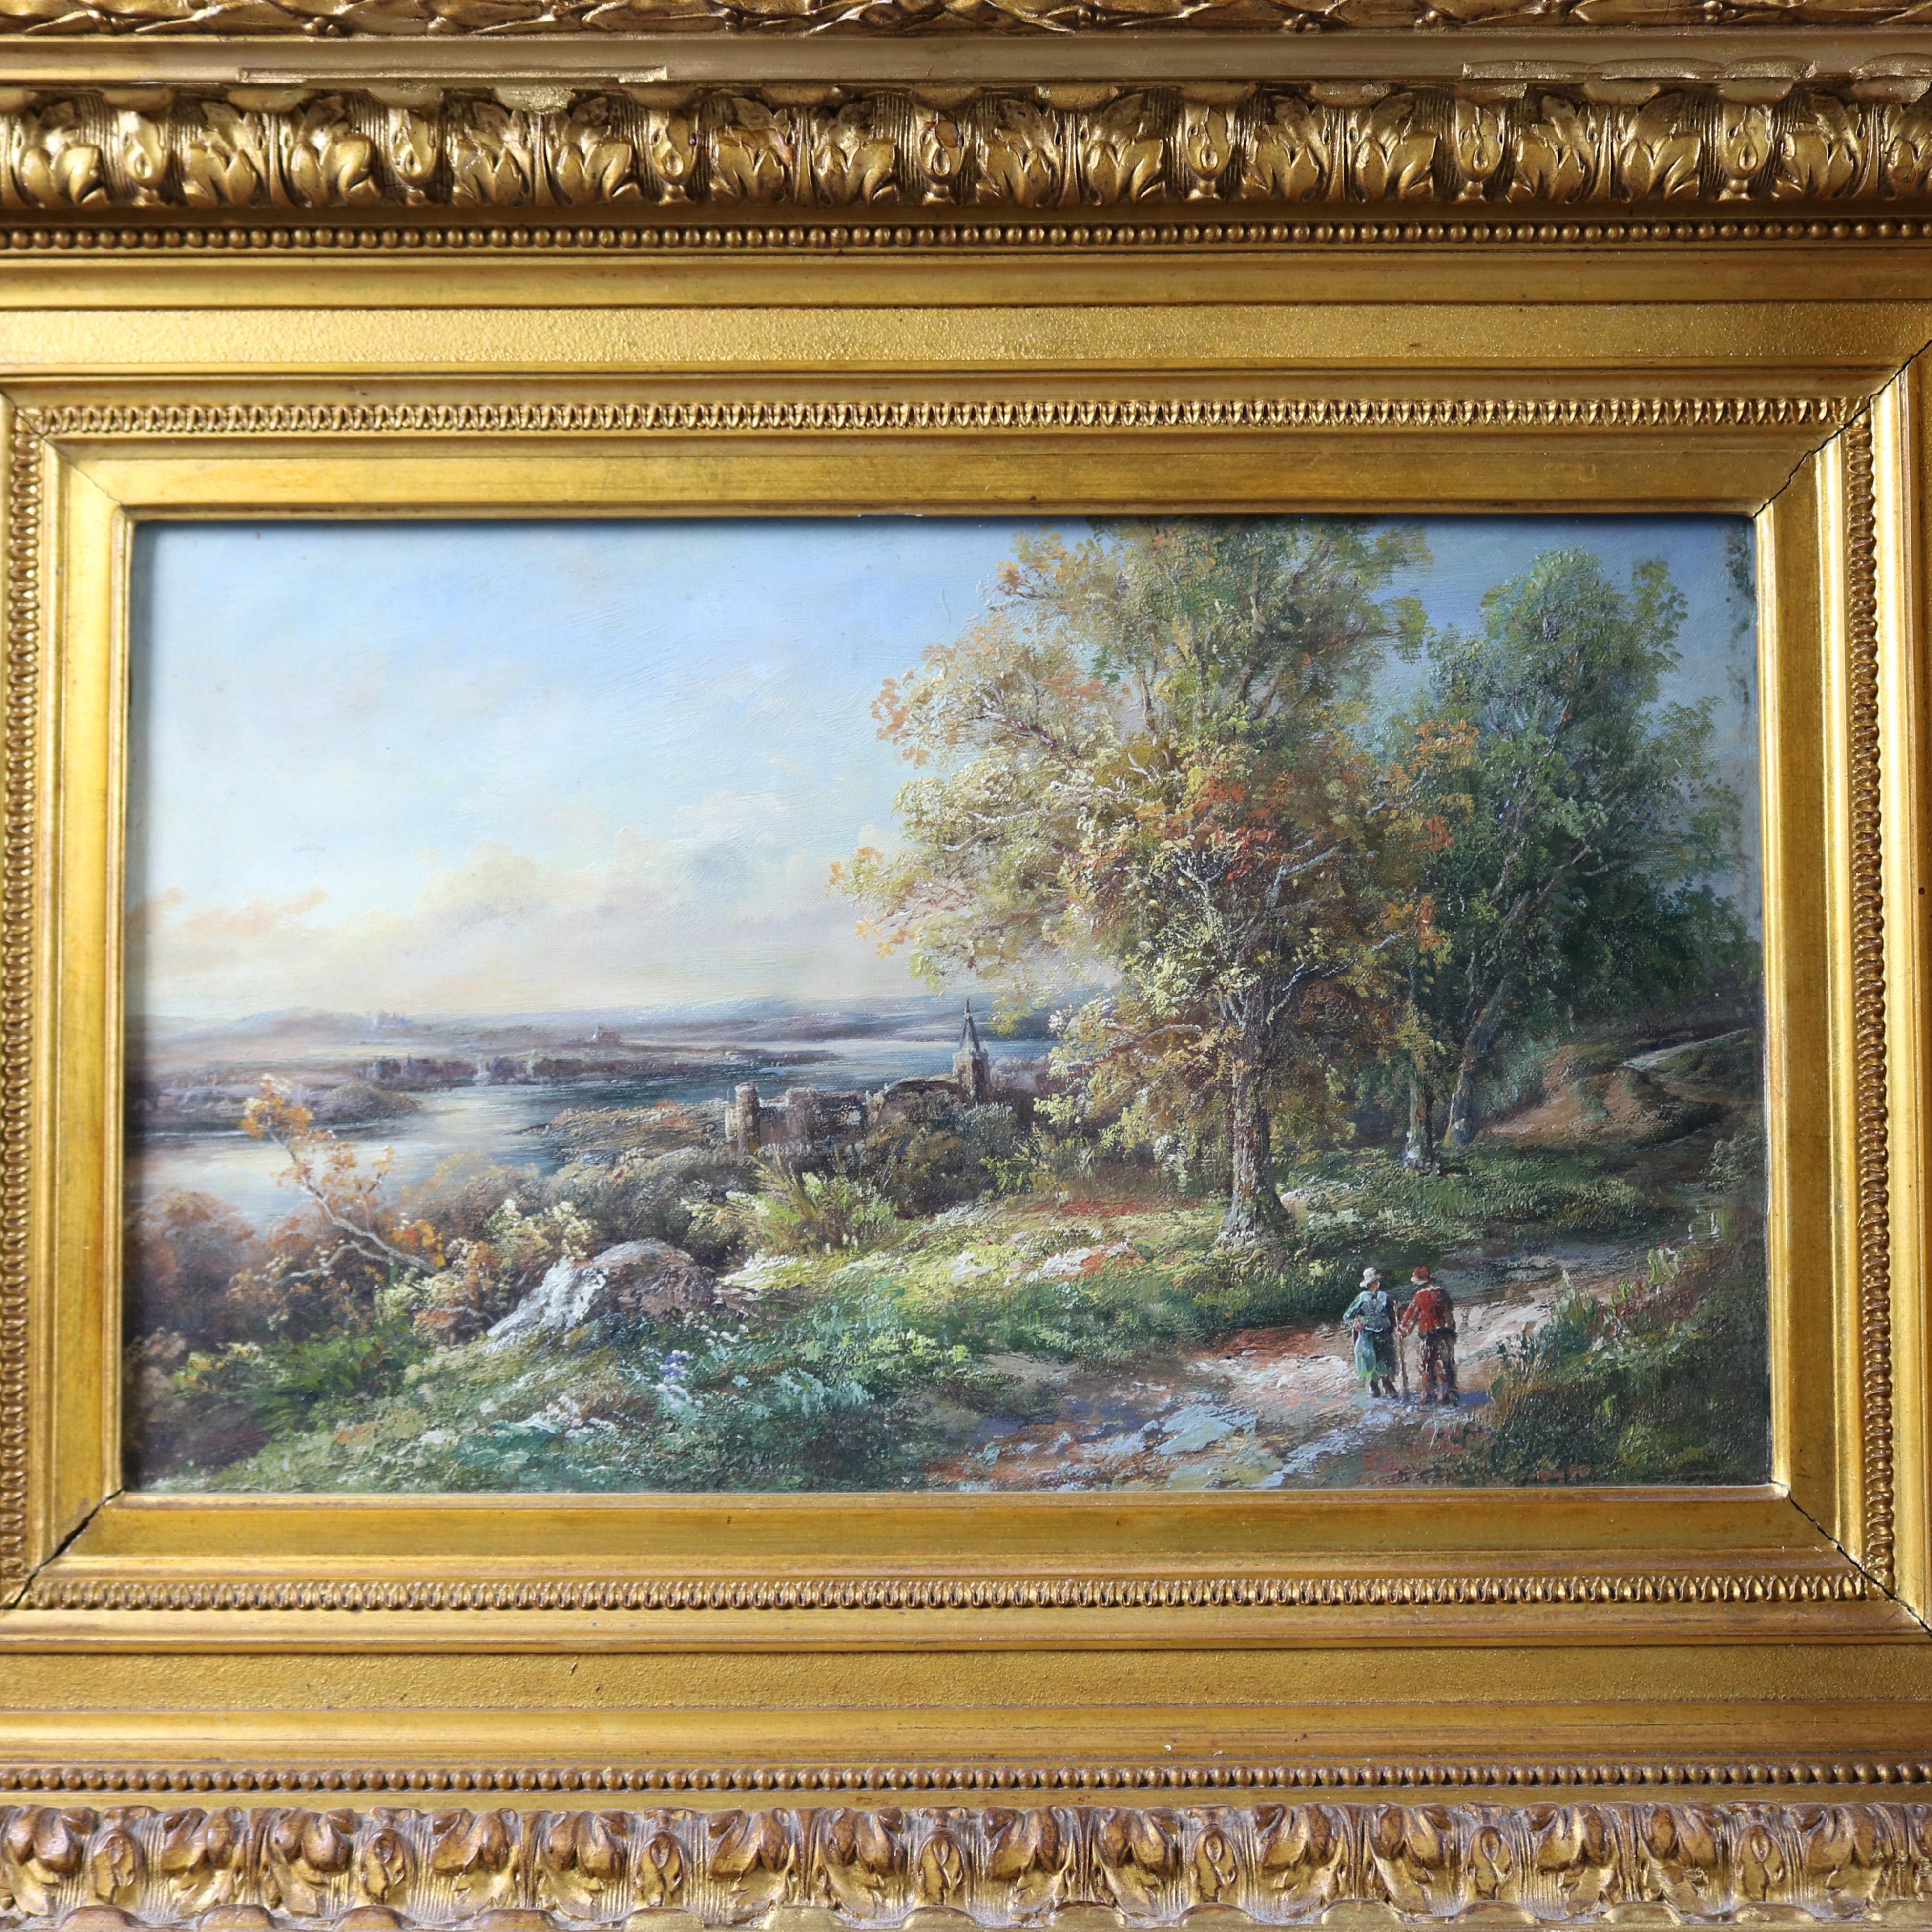 An antique English landscape watercolor on paper depicts countryside scene with figures on path and river in background, seated in giltwood frame, circa 1880.

Measures - overall 11.75